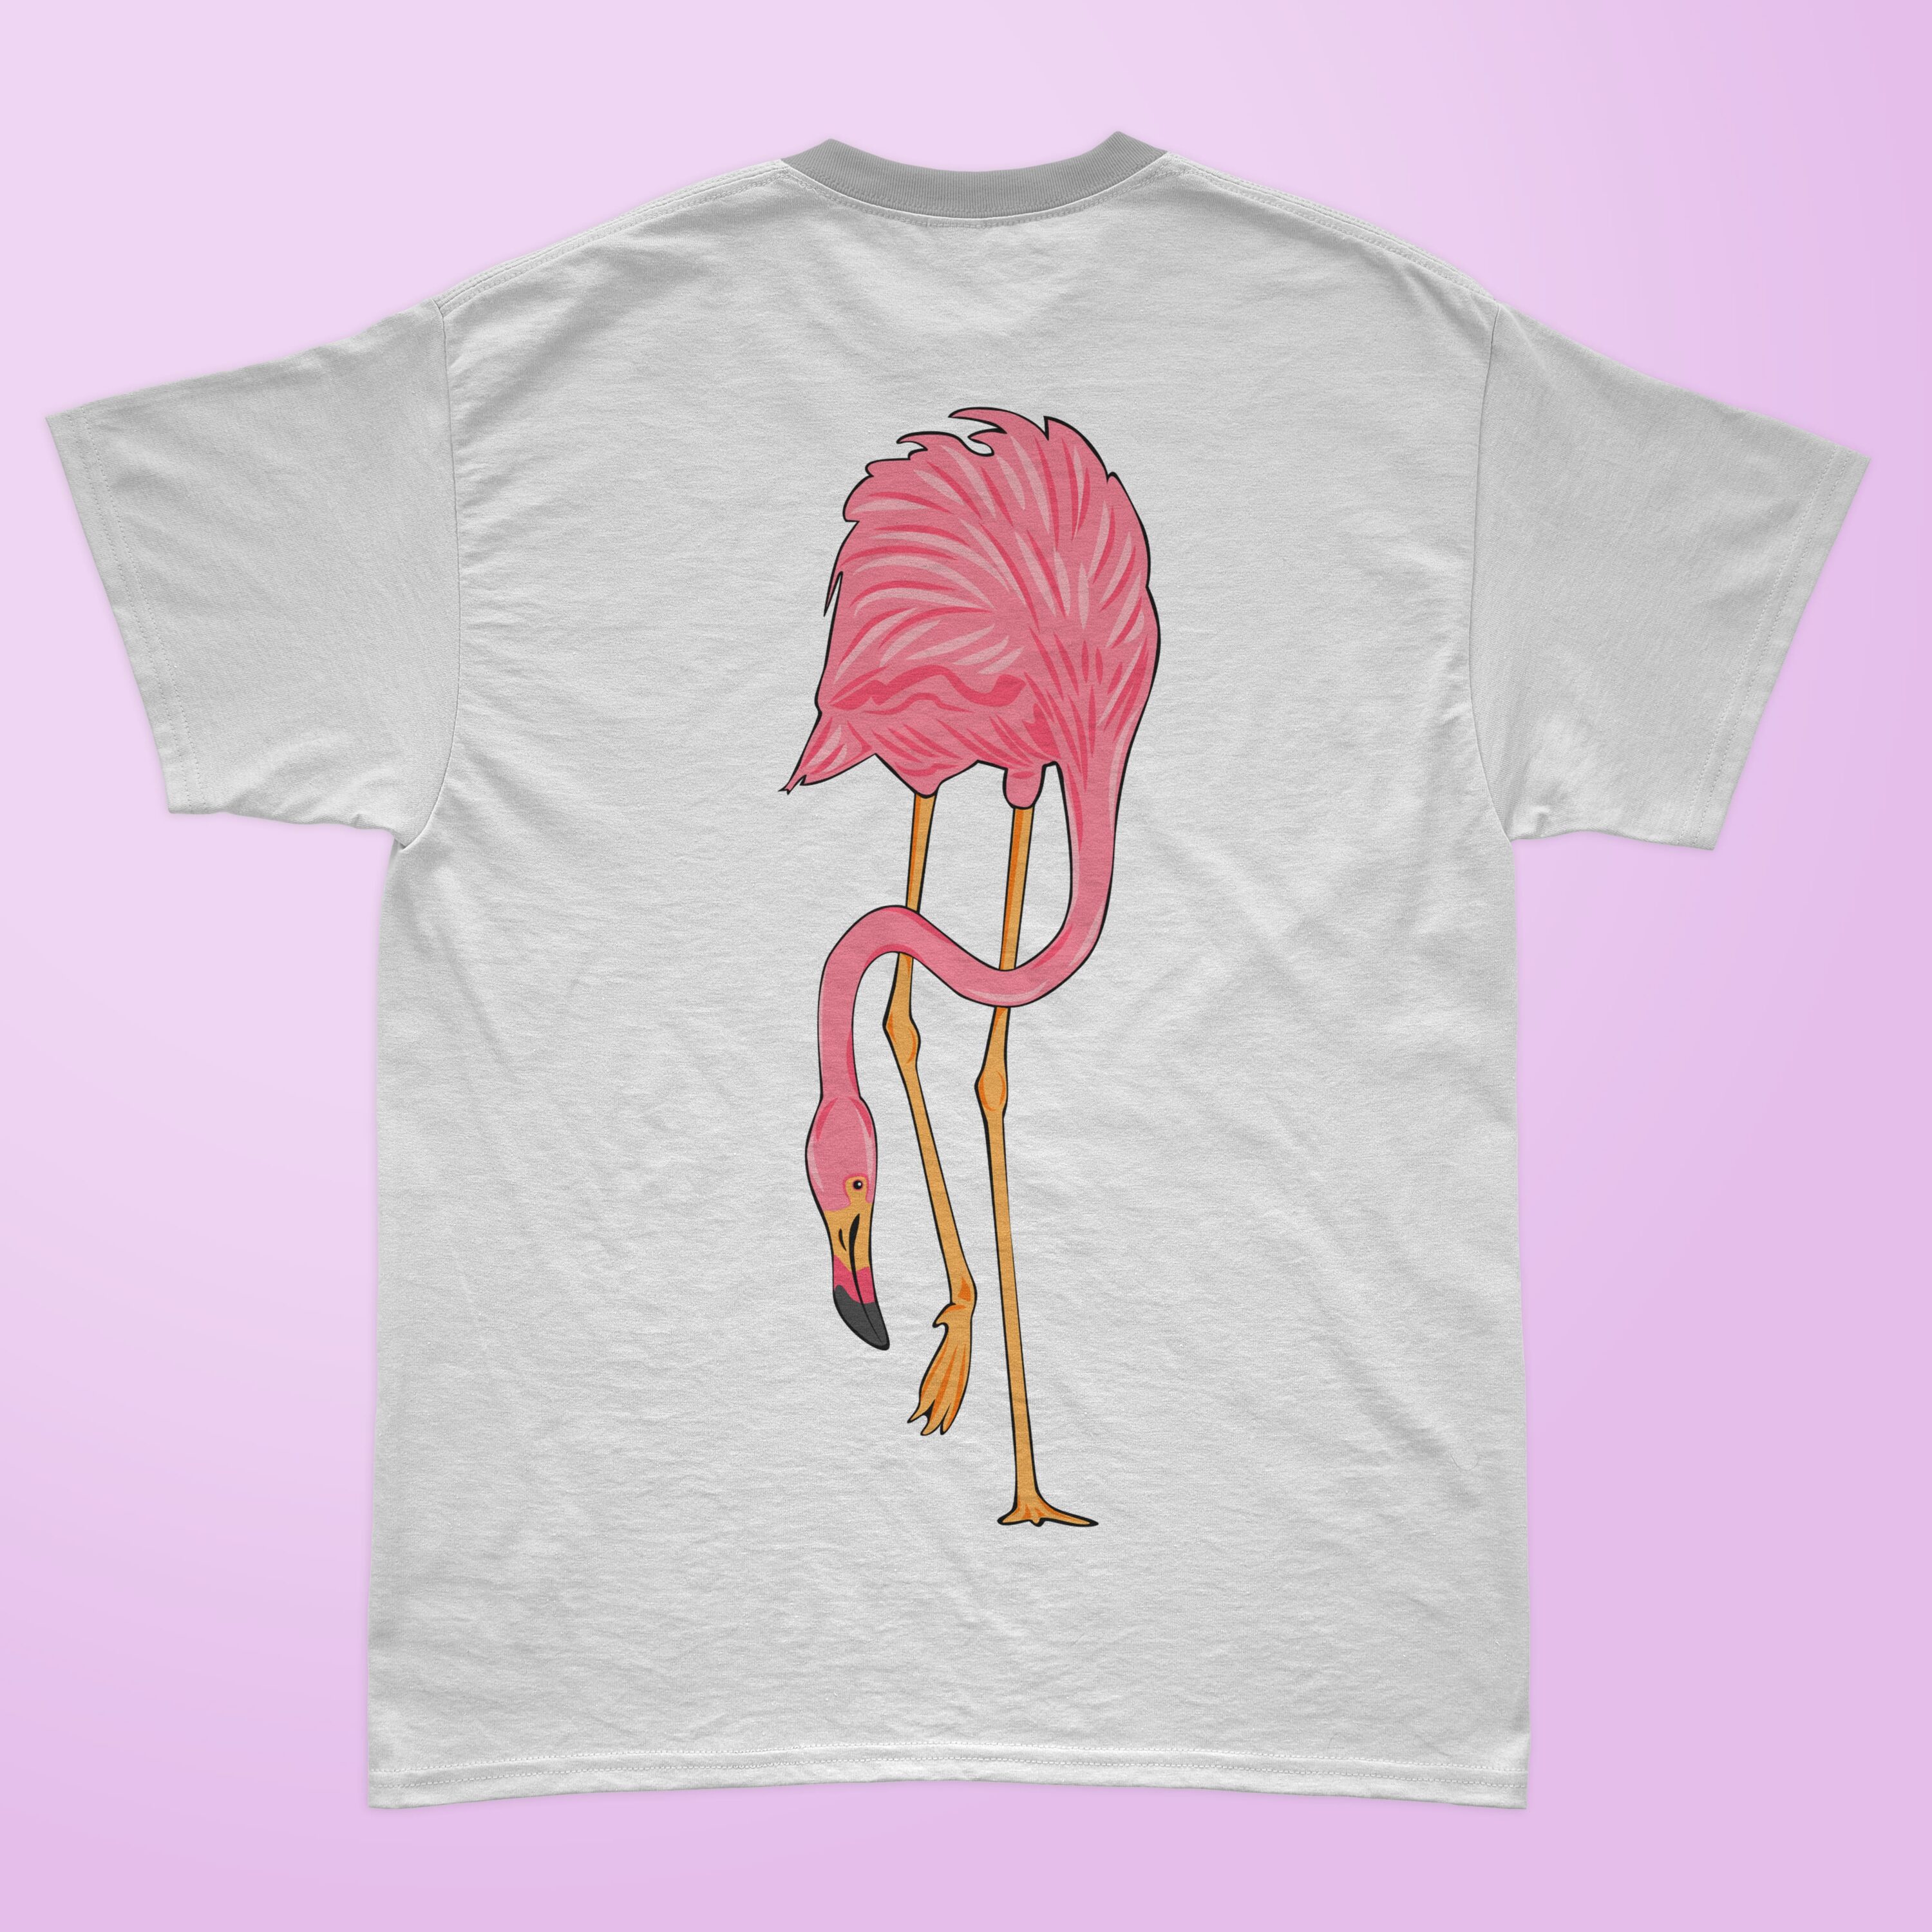 Interesting flamingo illustration for the different t-shirts.